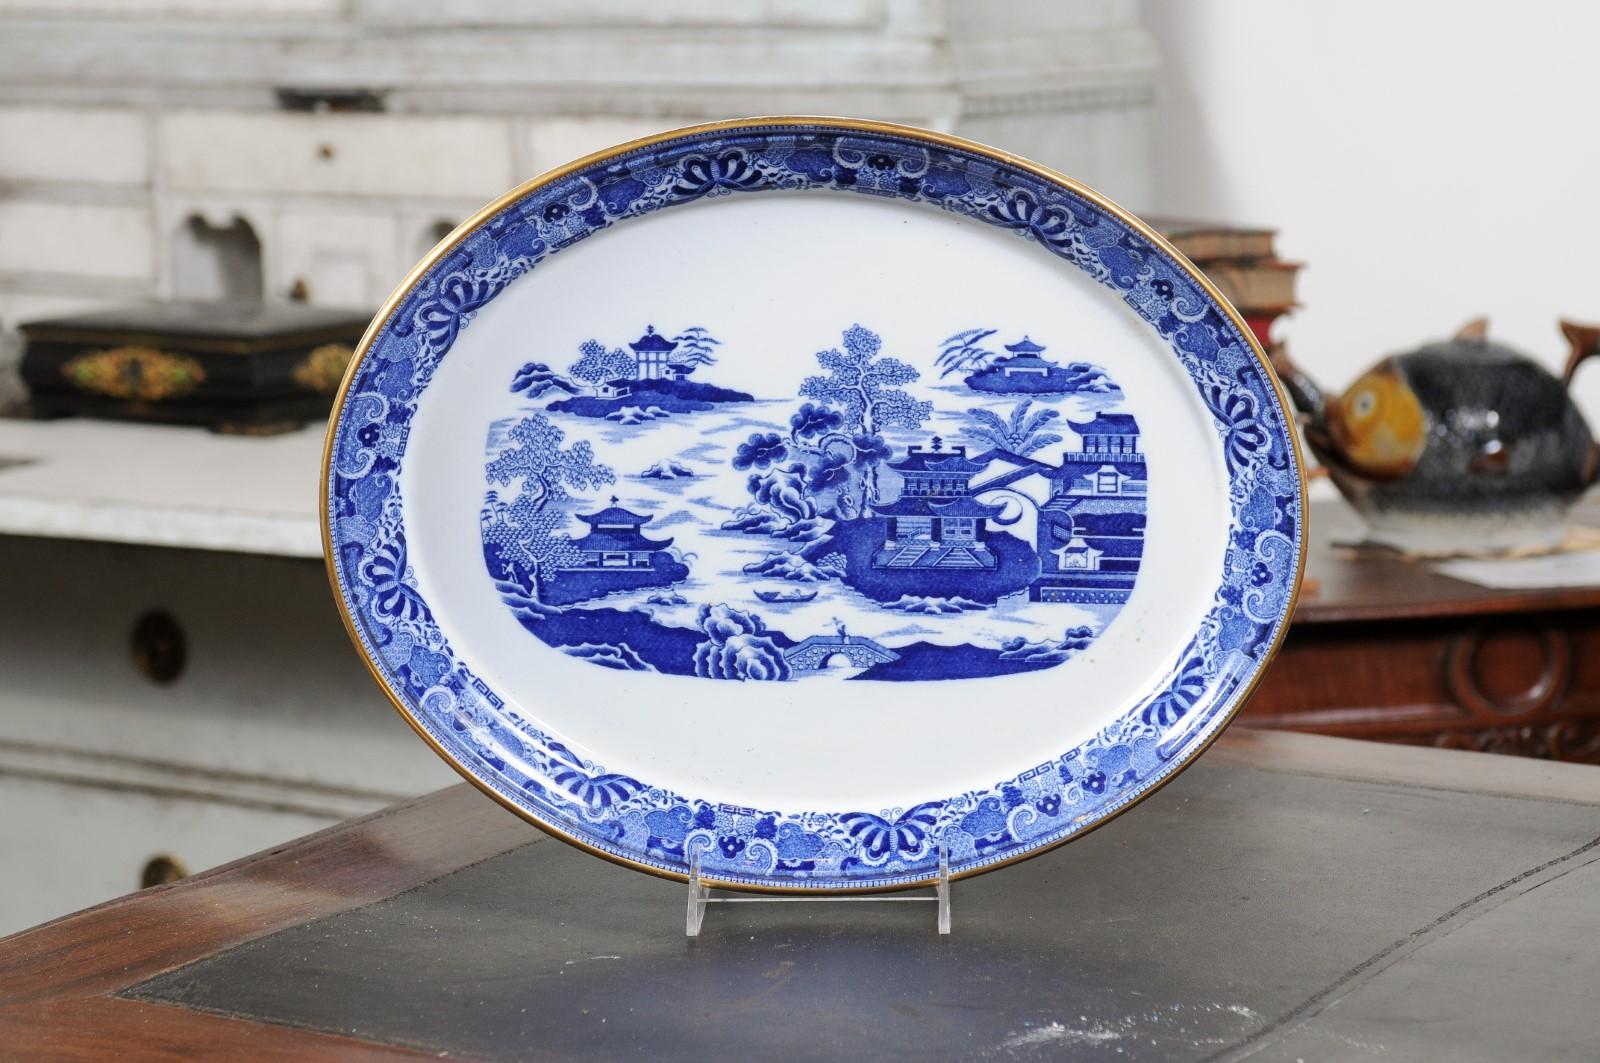 An English blue and white oval porcelain platter from the 19th century, with Chinoiserie motifs. Created in England during the 19th century, this porcelain platter features a white ground perfectly highlighted by a Chinoiserie pattern. Traditional